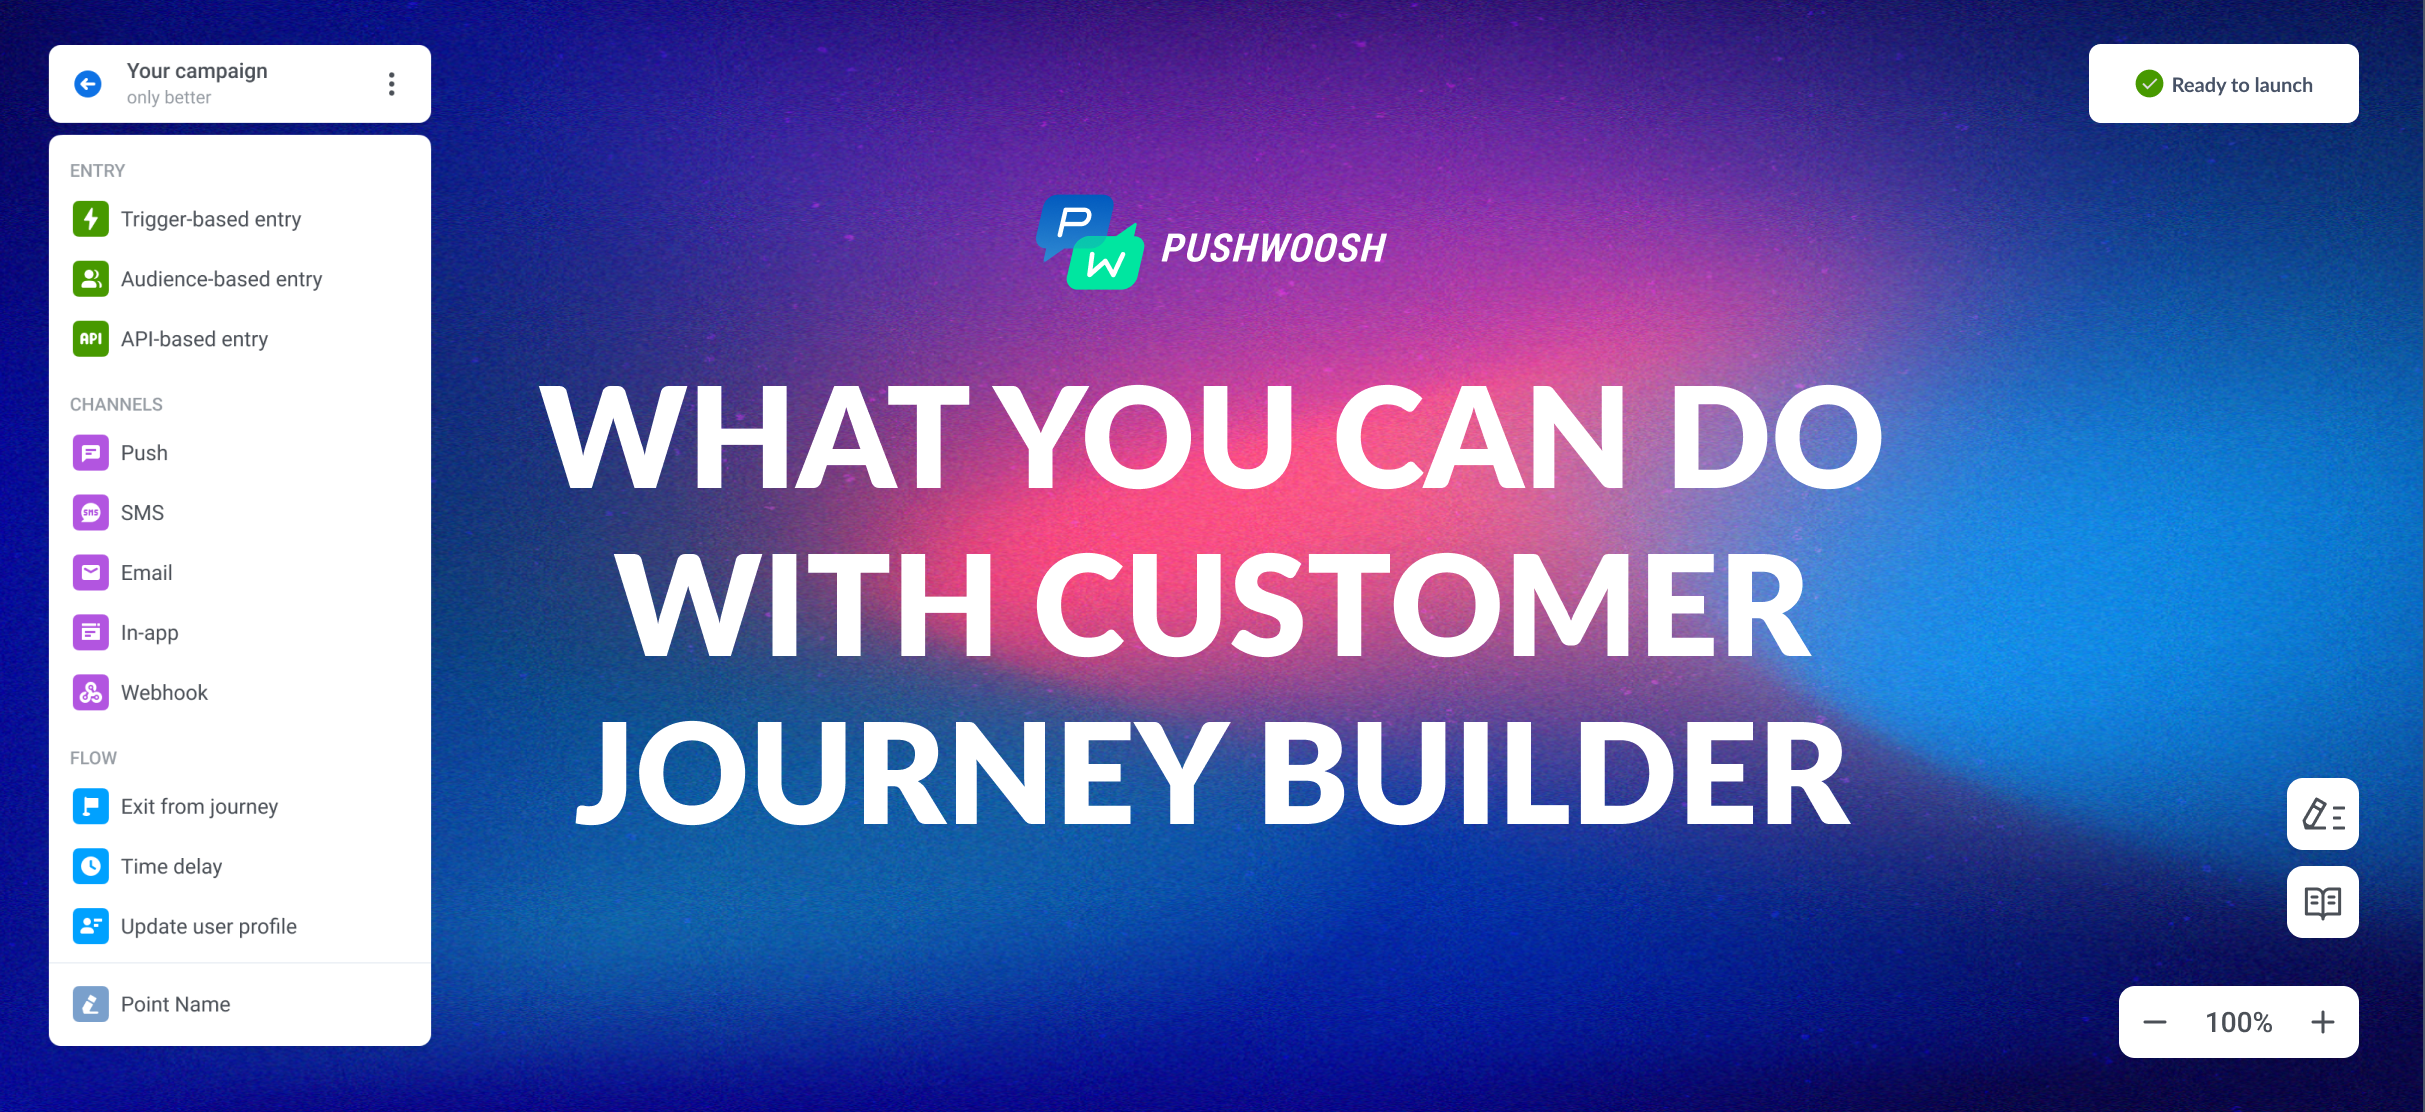 Kickstart your campaigns with Pushwoosh Customer Journey Builder